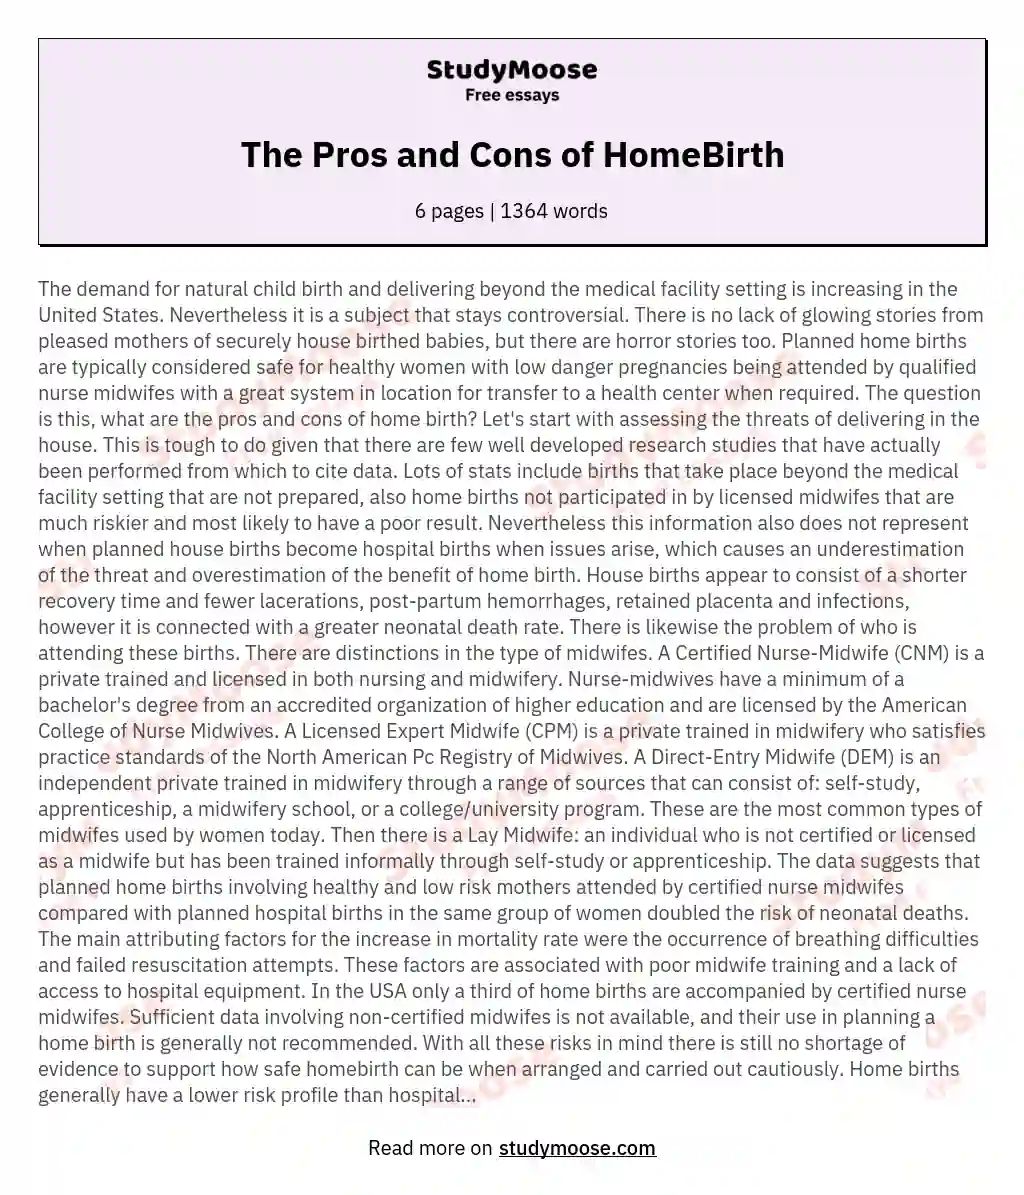 The Pros and Cons of HomeBirth essay